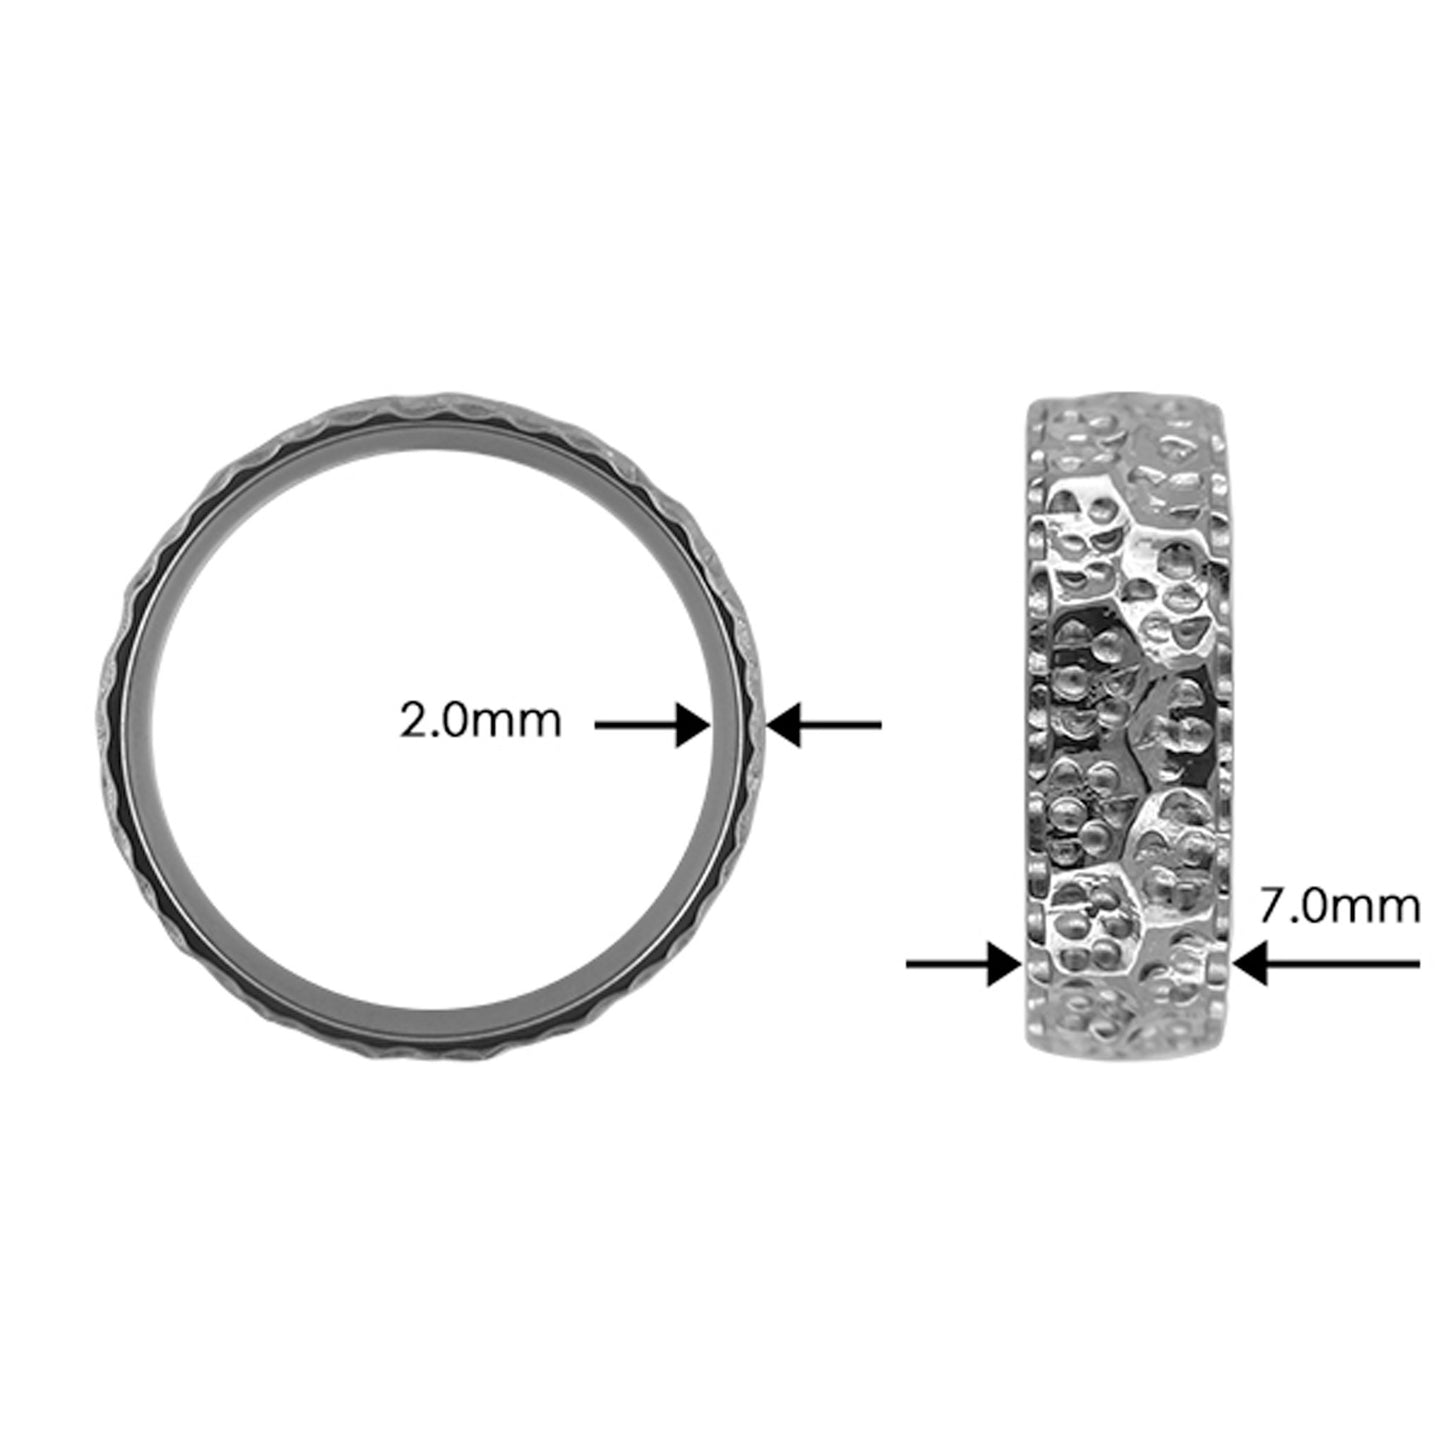 Tantalum Ring w/o min. Lava Pattern Polished Ring profile: width: 7.0 mm || height: 2.0 mm. The picture shows the width (7.0mm) and hight (2.0mm)) of the ring